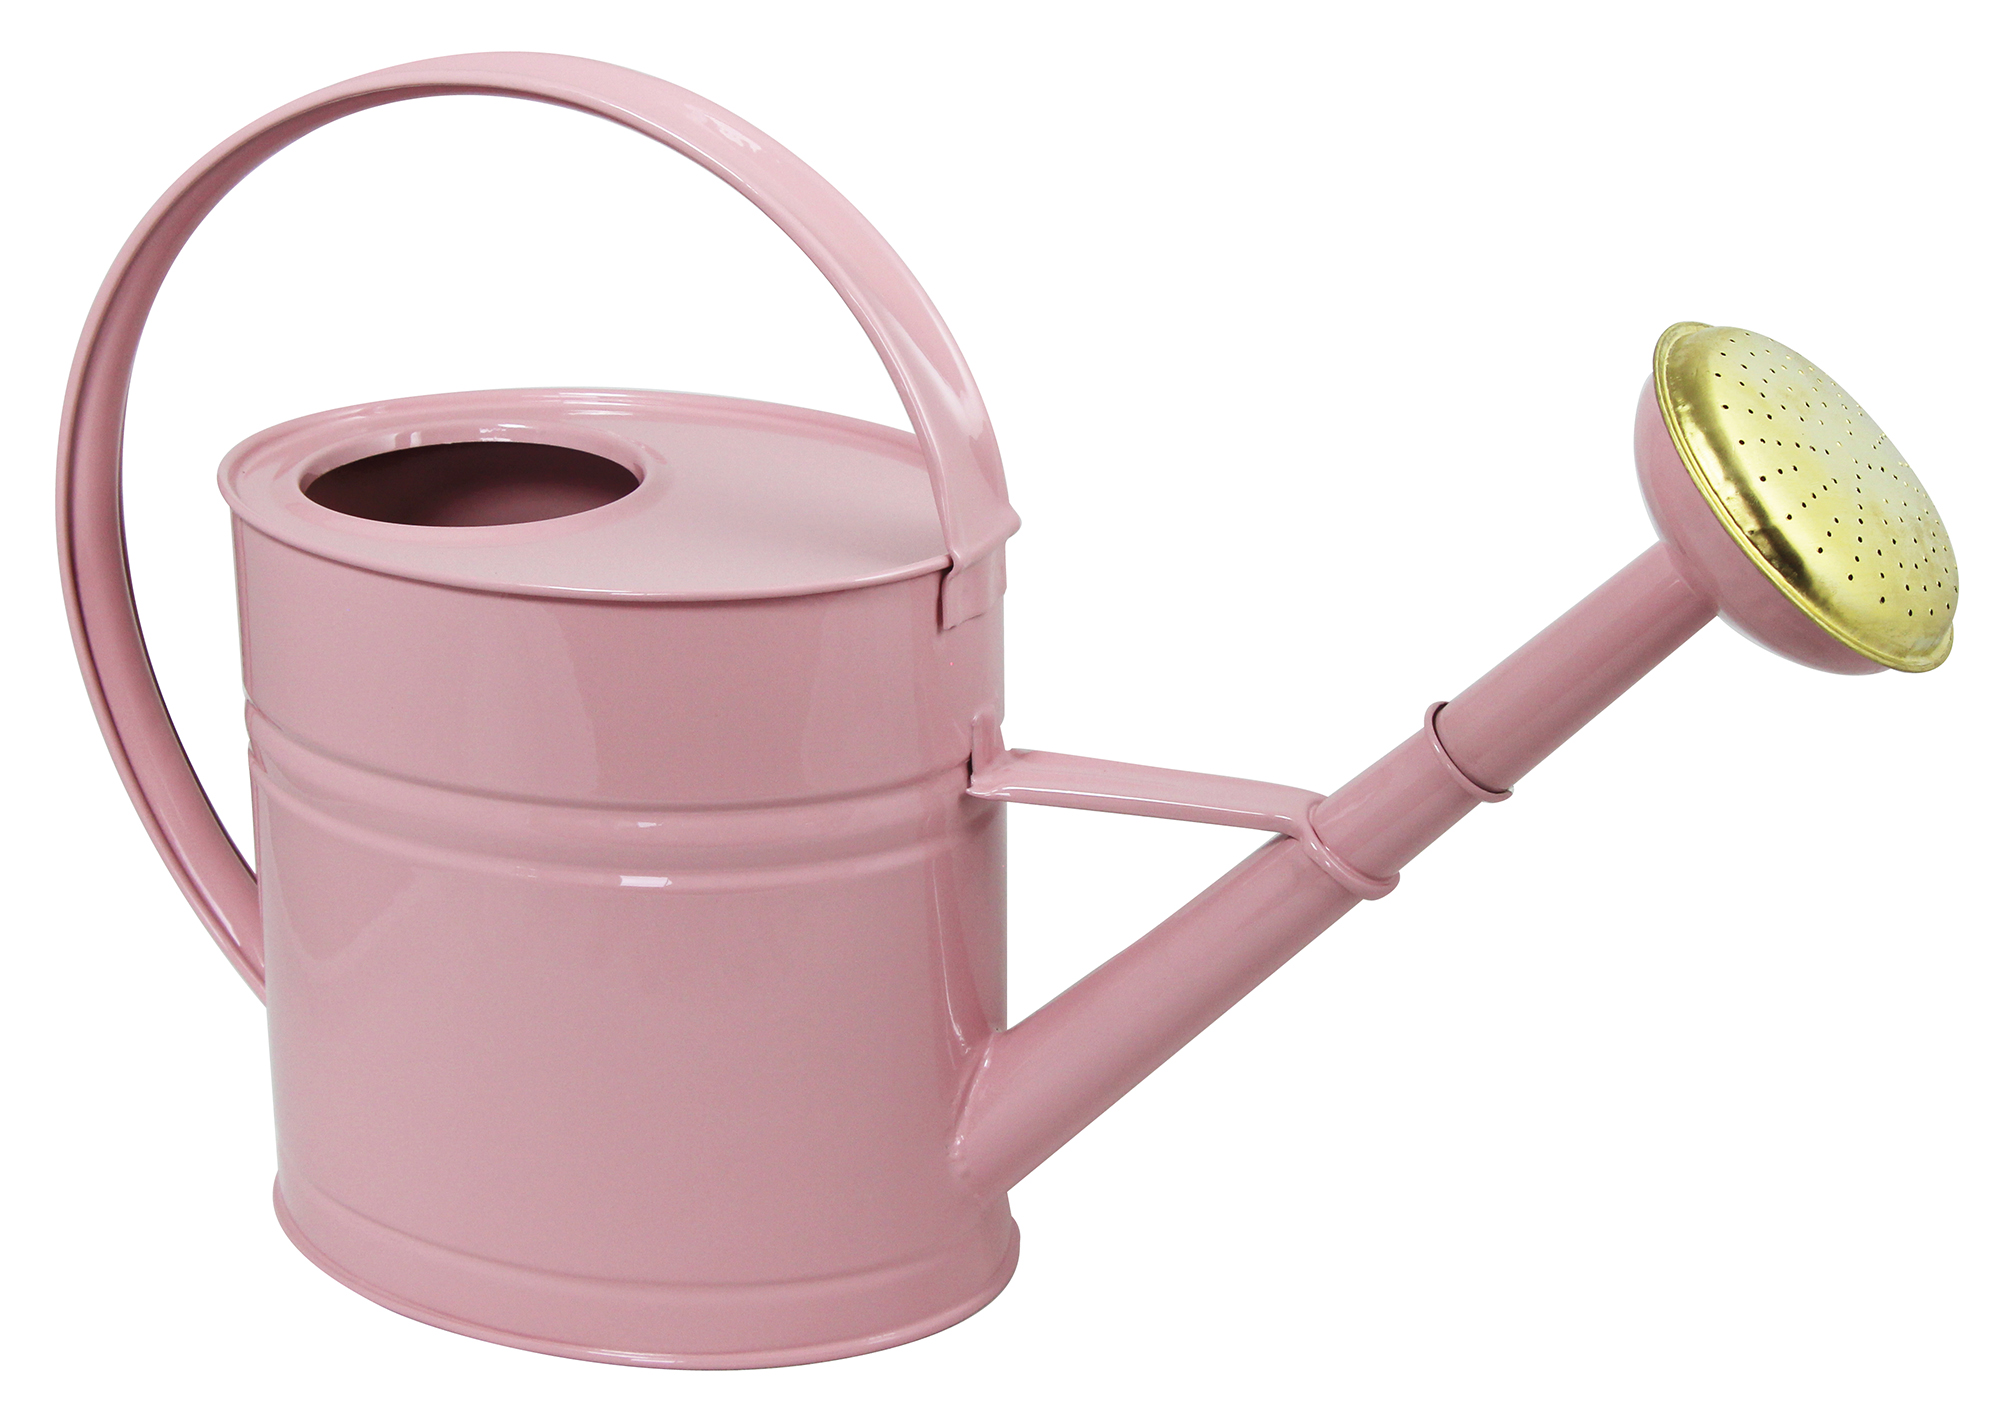 Steel watering cans galvanized by a volume of 4L Rose Pastel